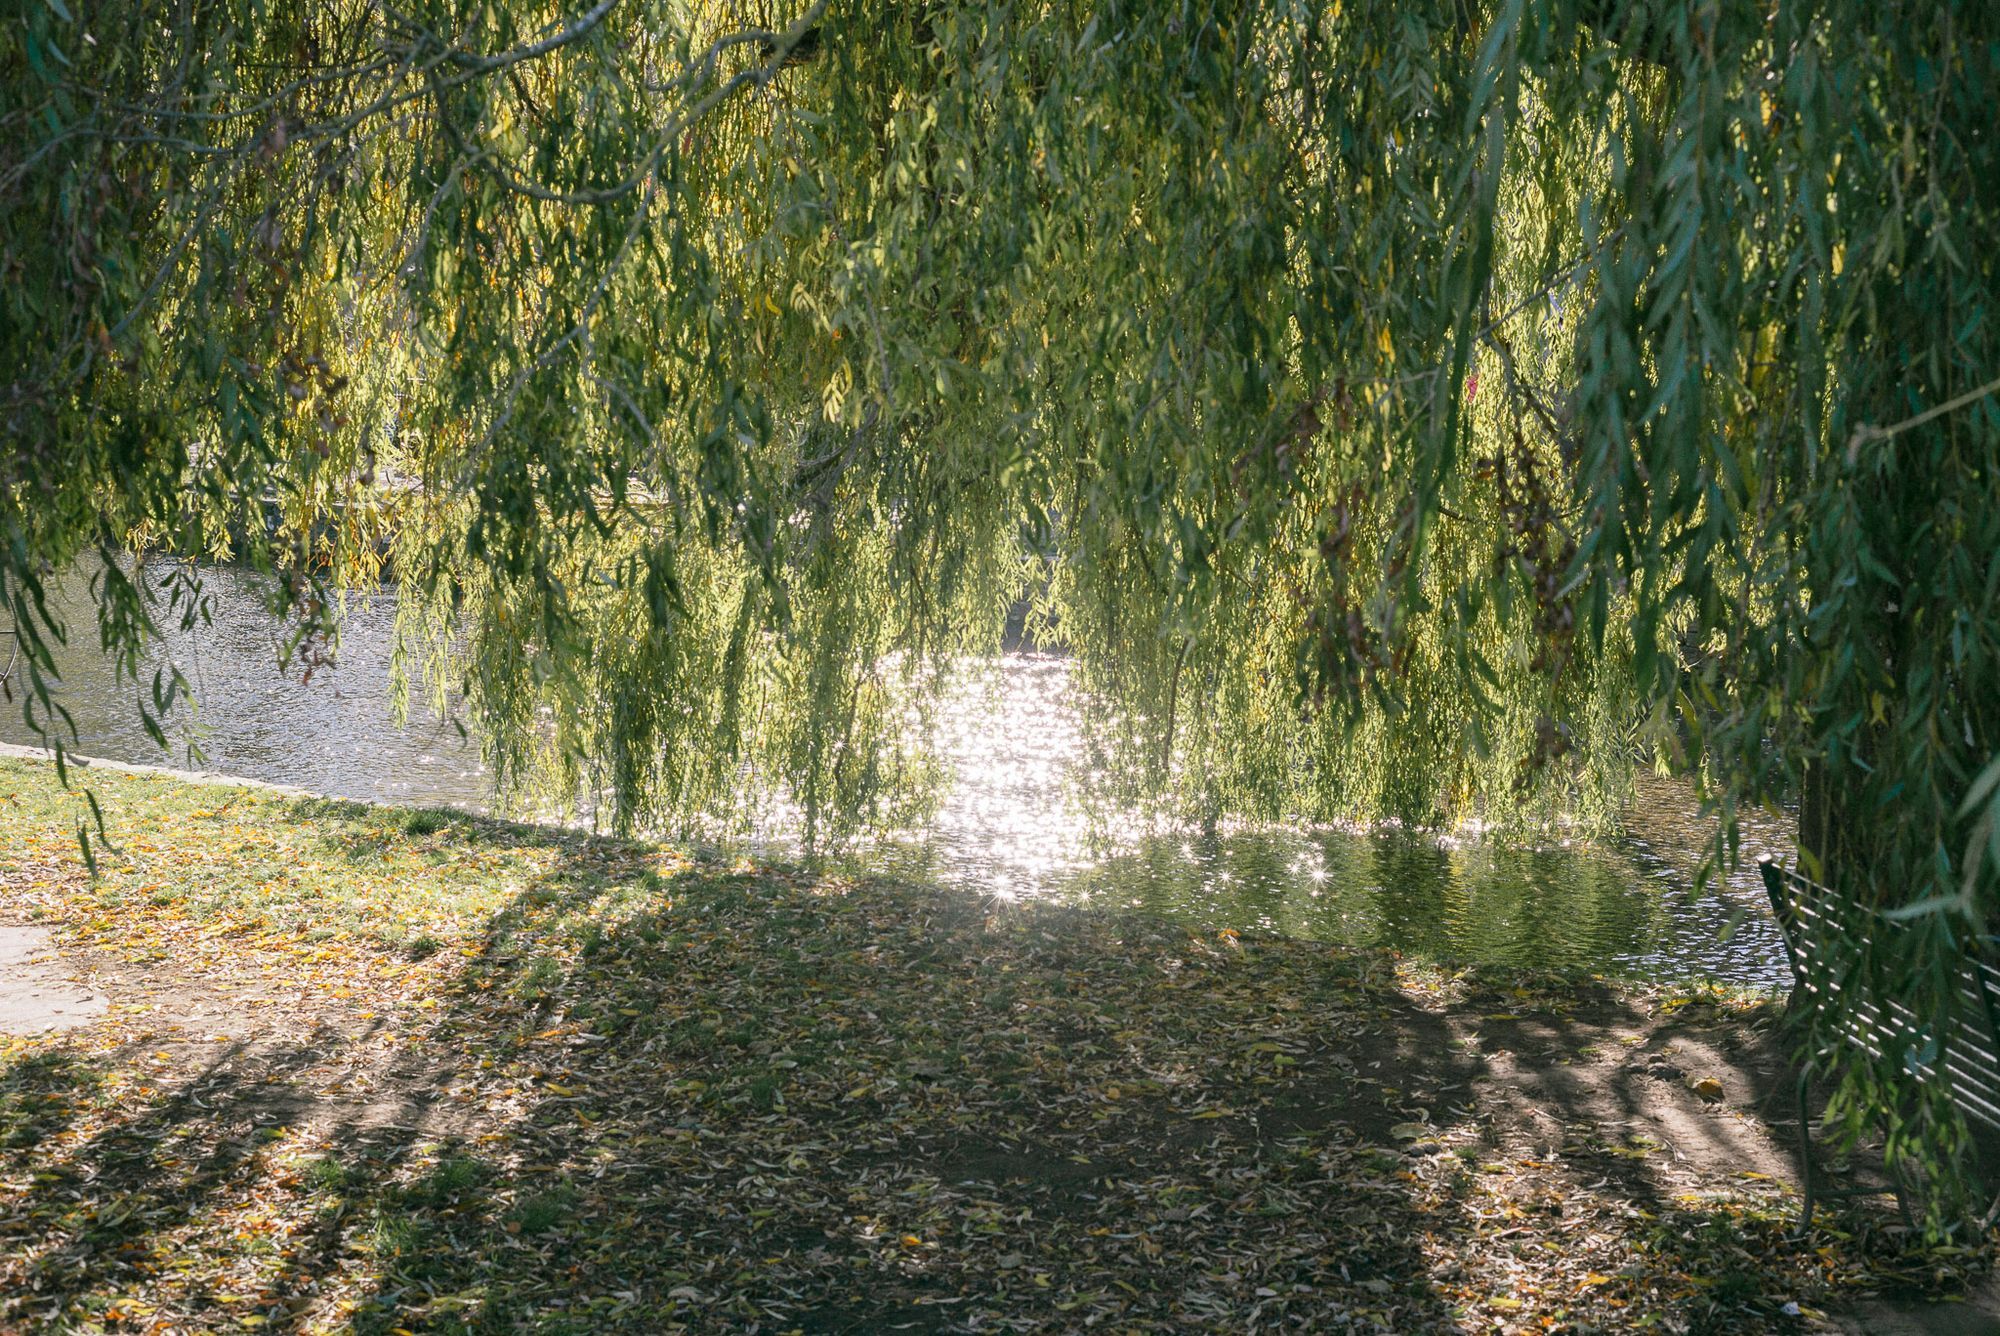 A large willow tree dips its branches in a passing river on a sunny day.